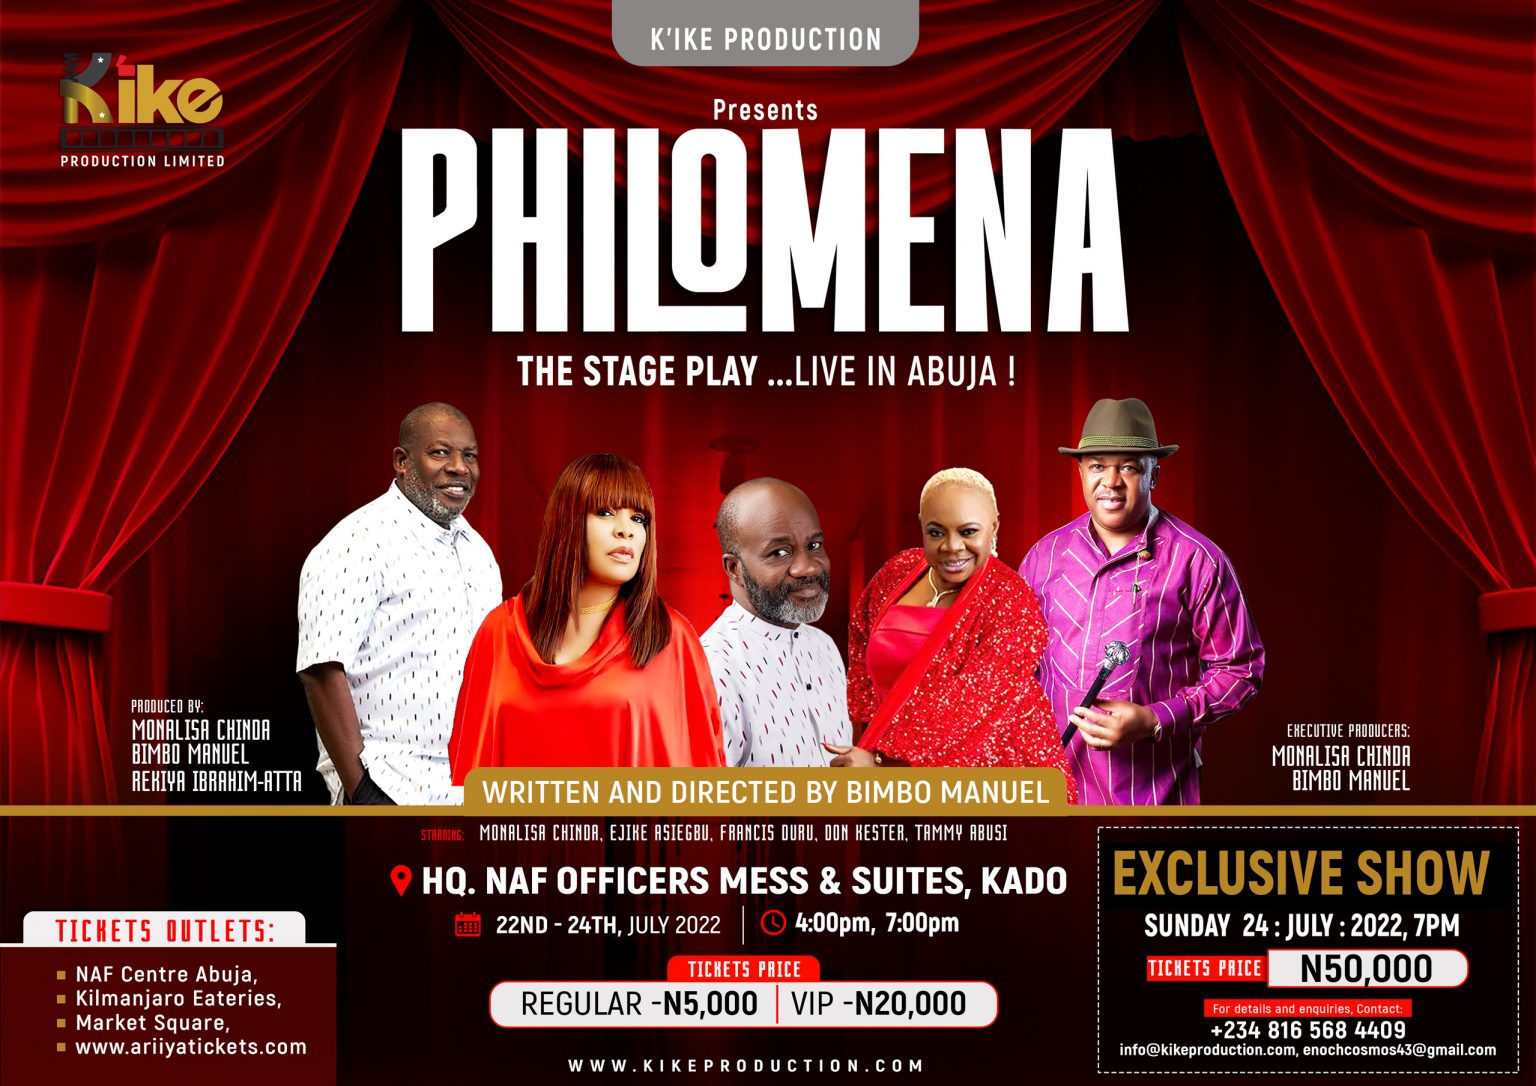 Stage Play “Philomena” Is Back! By Popular Demand